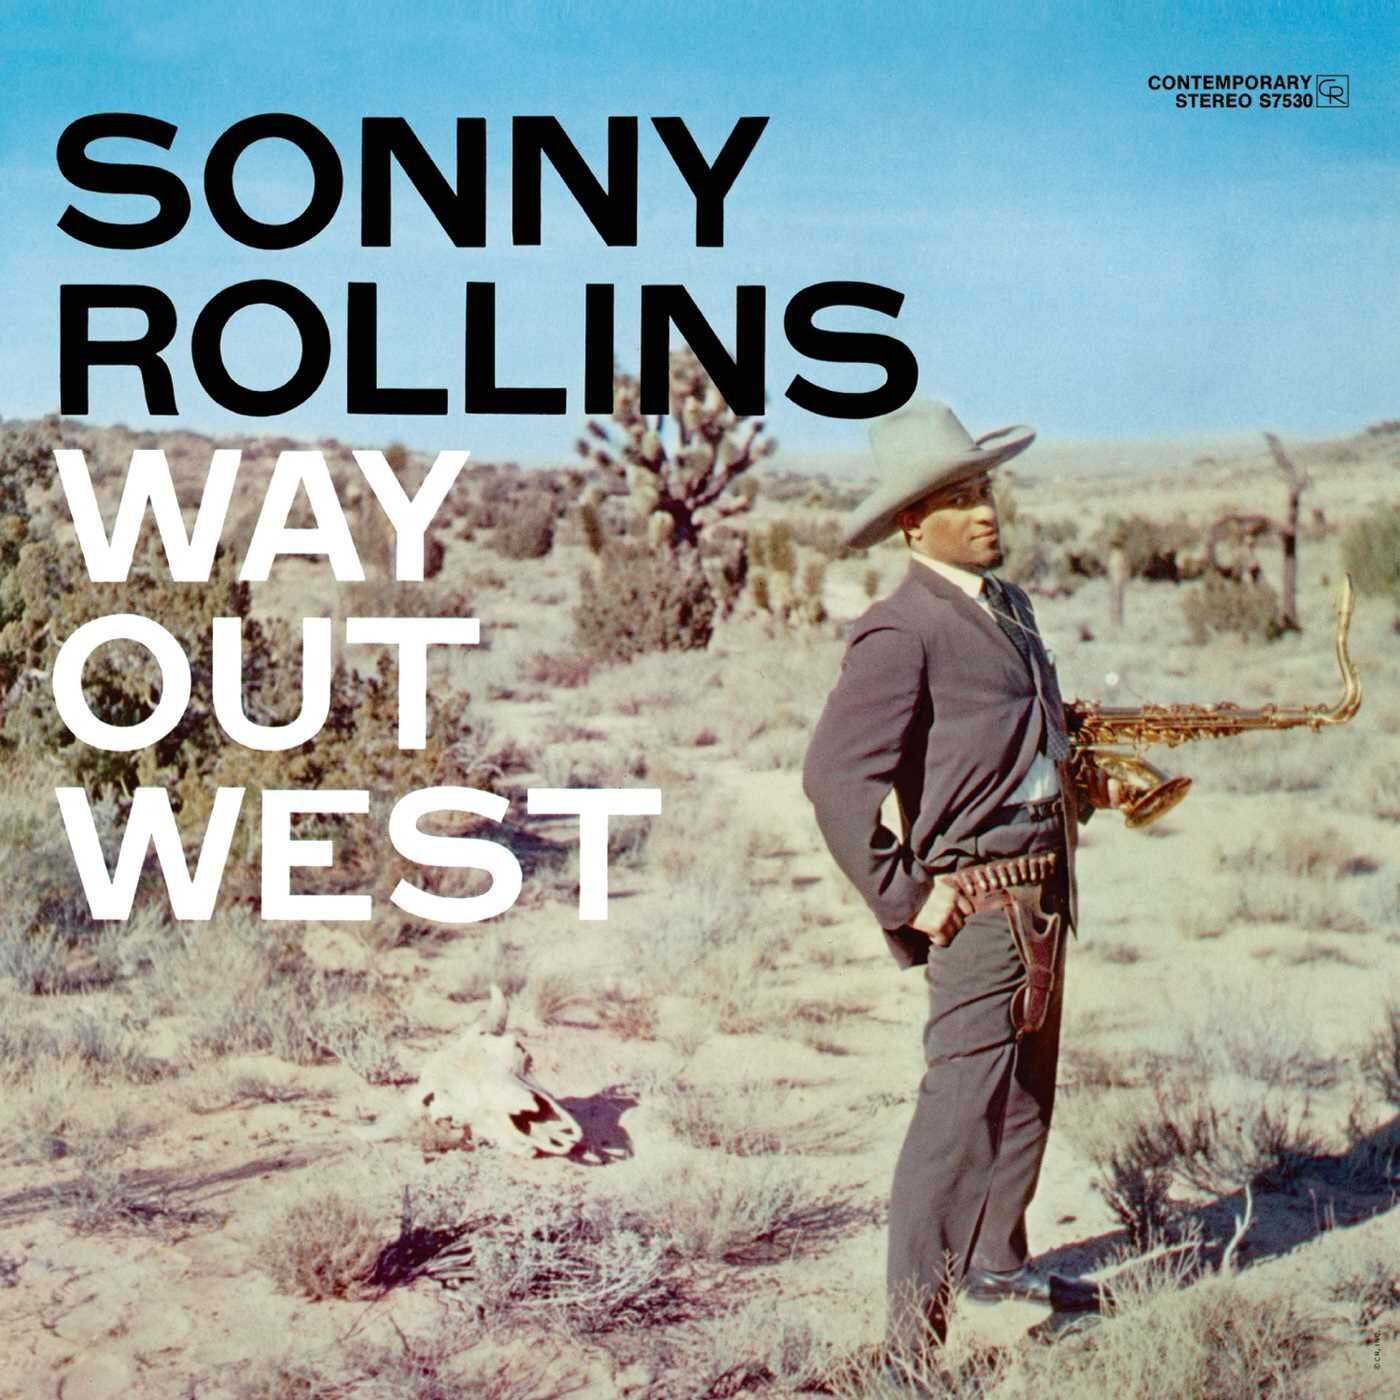 Way Out West (1957)